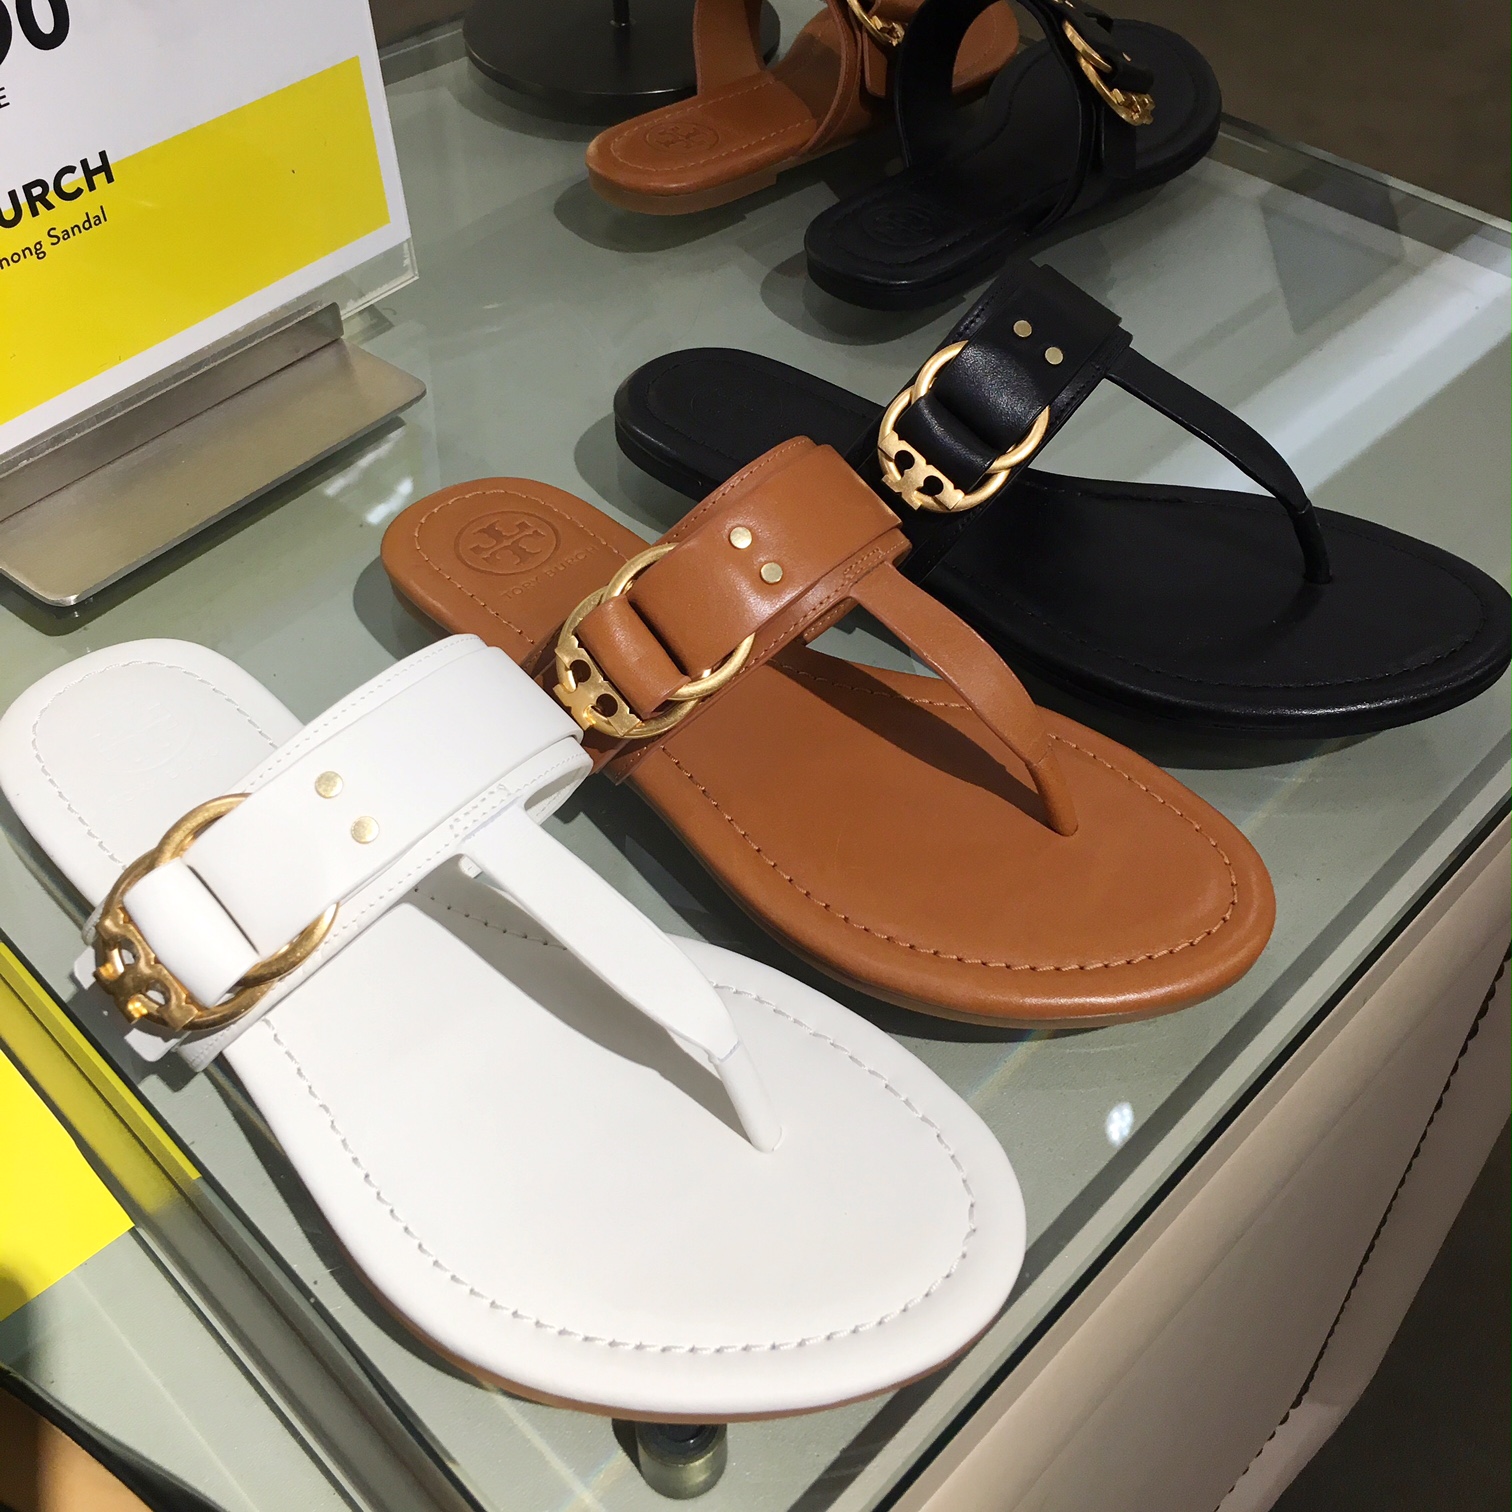 Tory Burch Sandals Nordstrom 